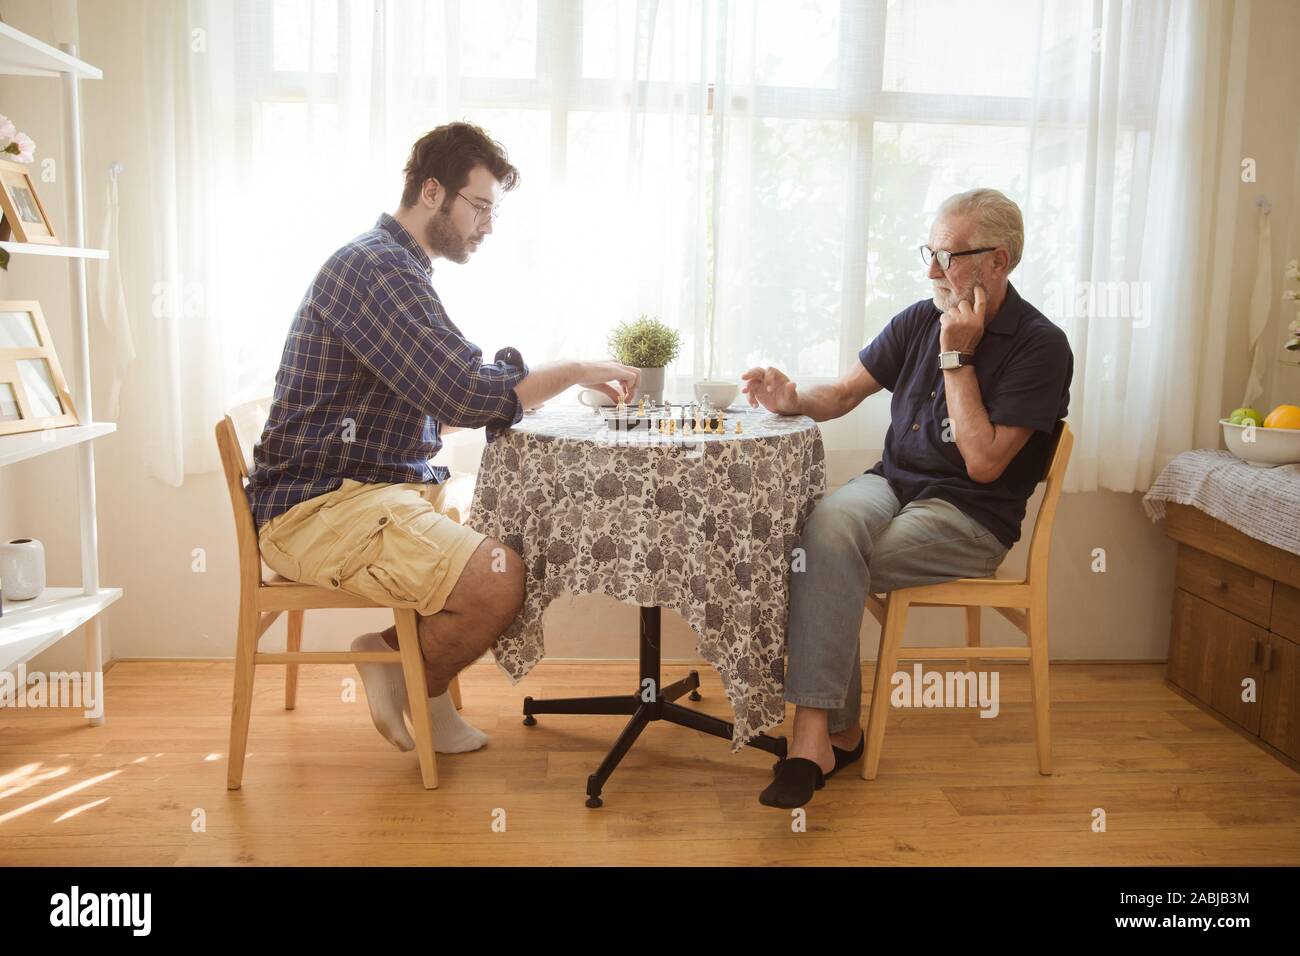 Young man and elder old man playing chess board game together at home. Stock Photo